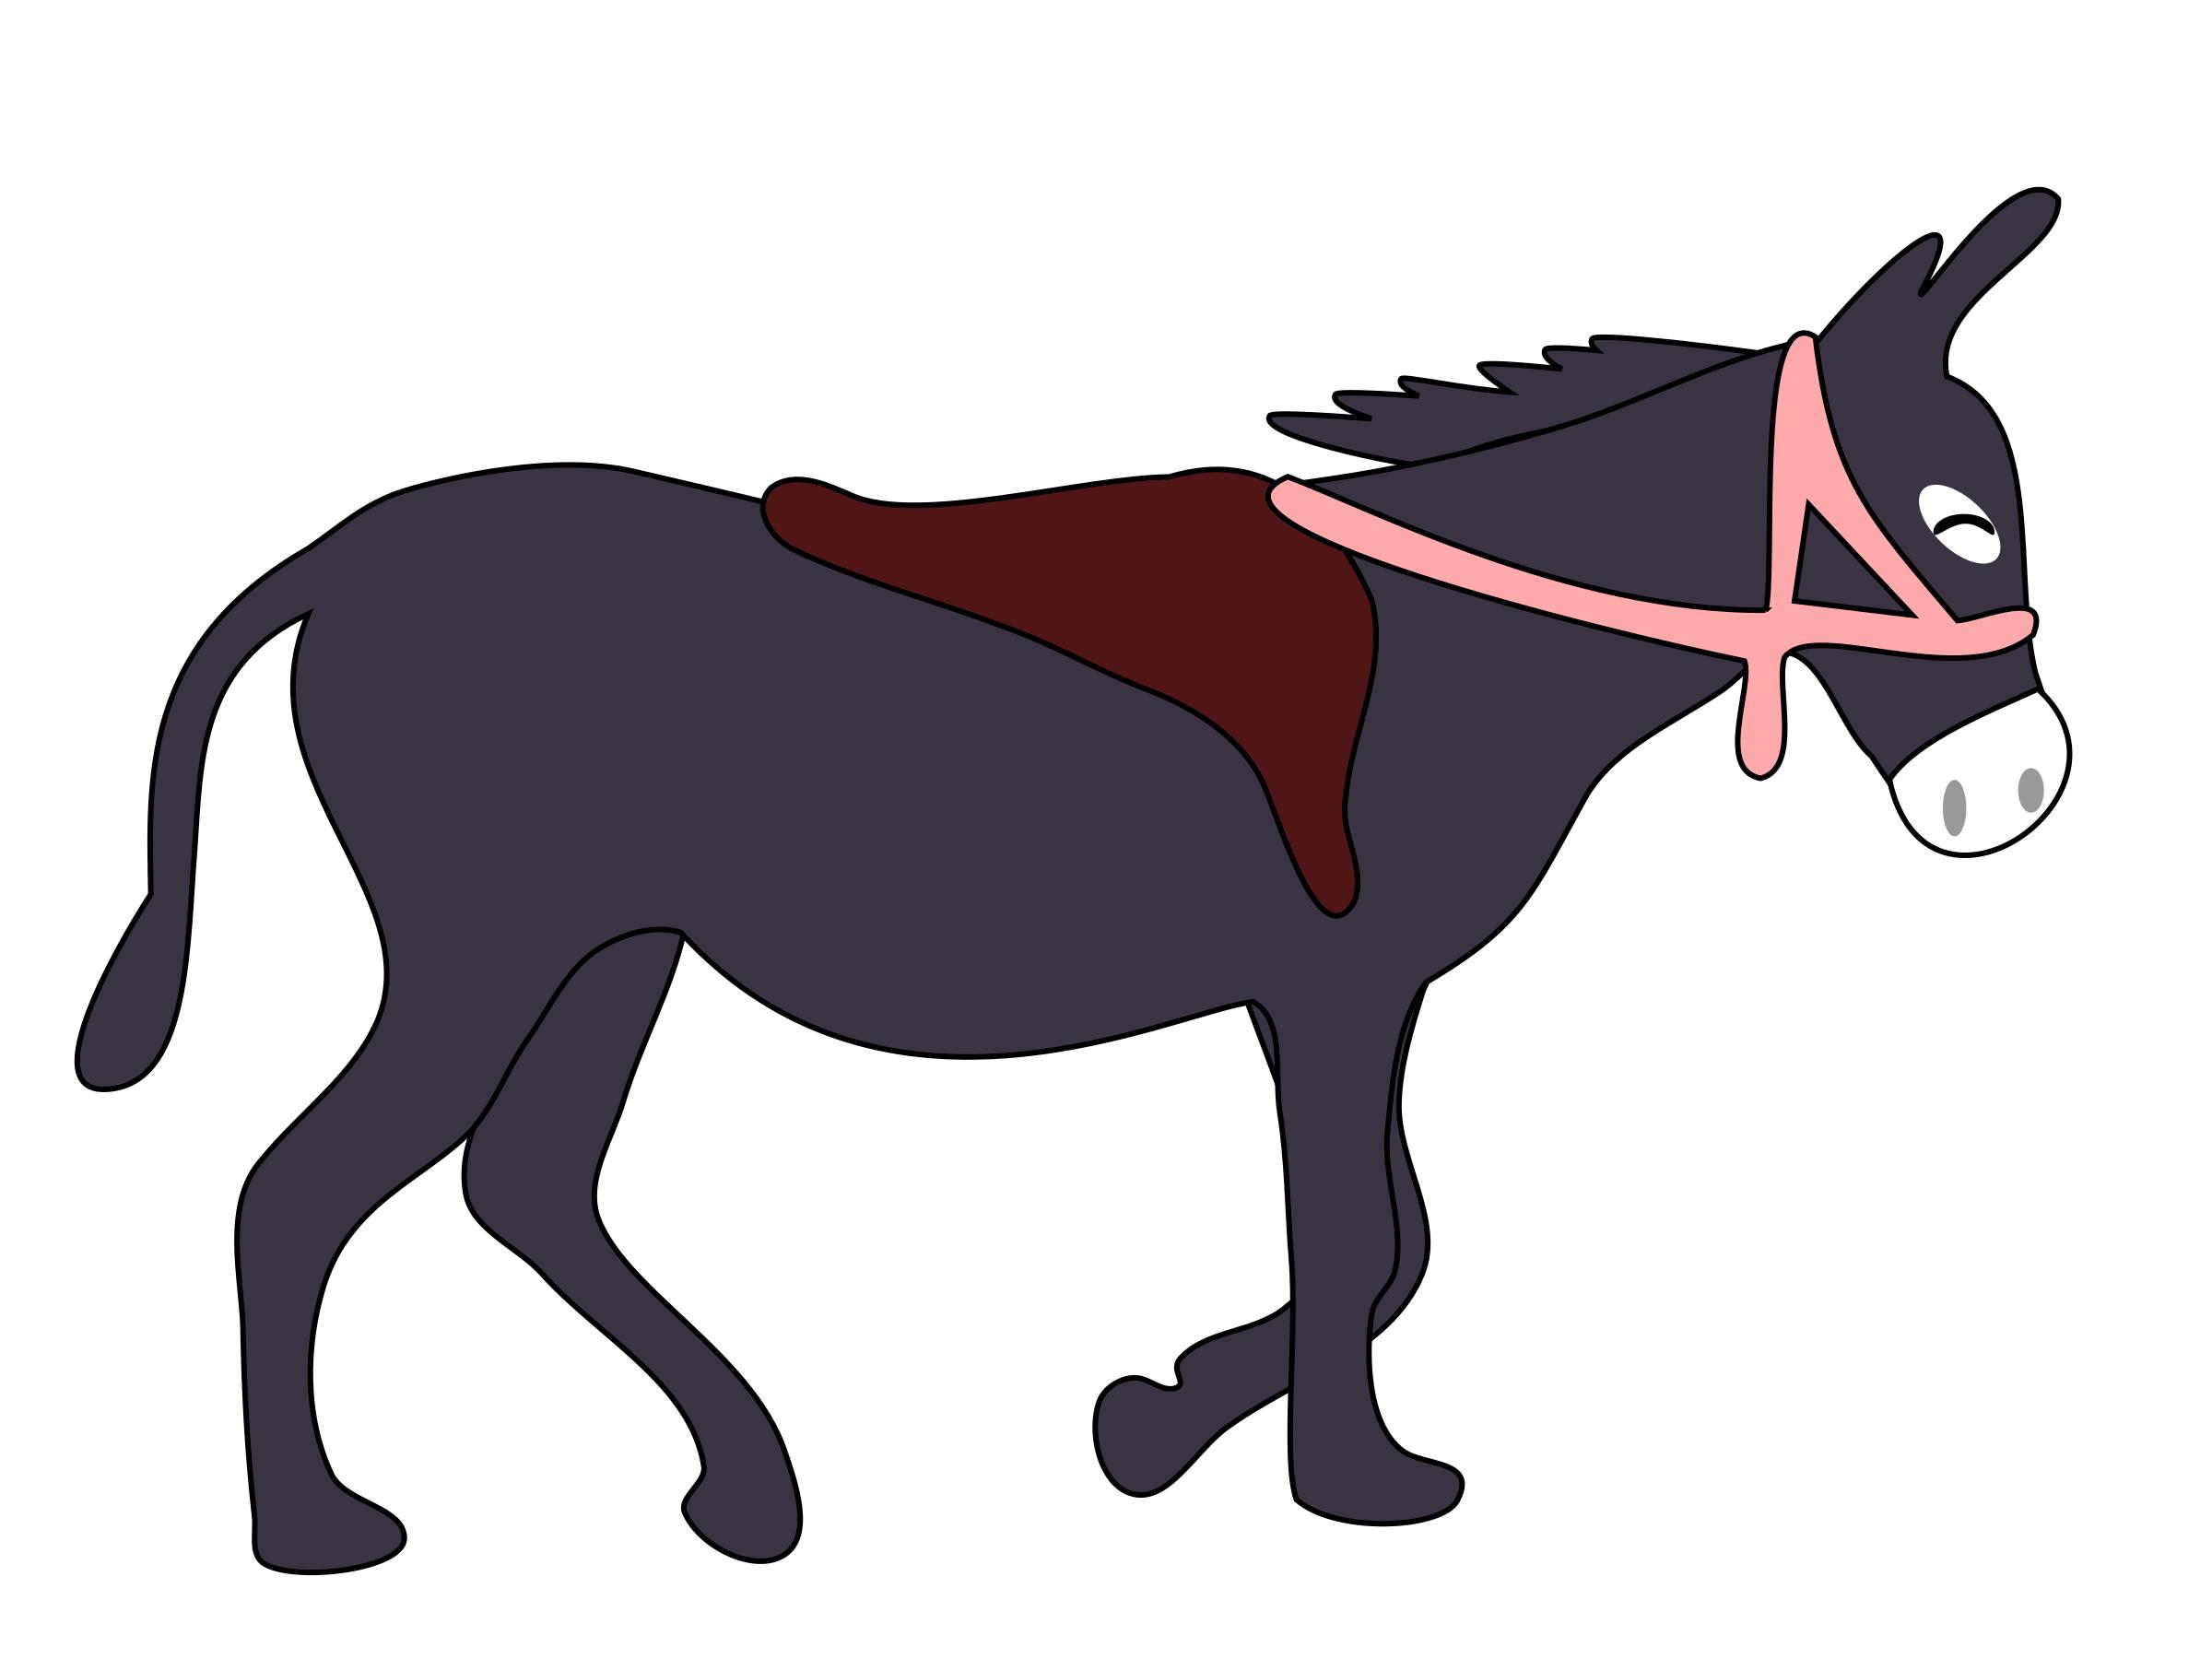 donkey is smiling with a saddle and a pink bridle png